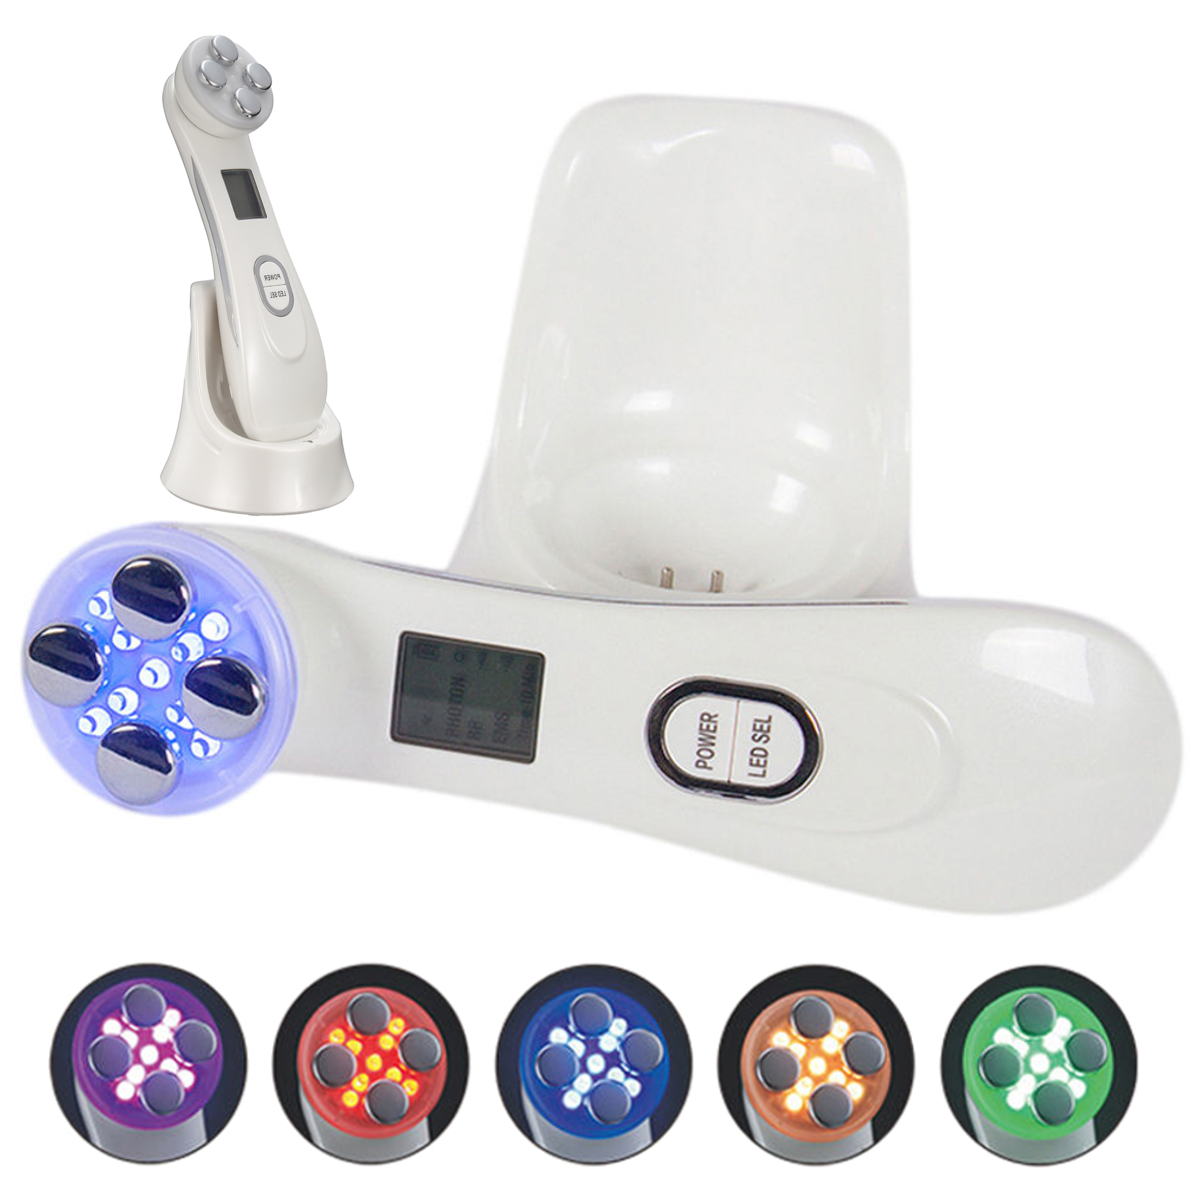 

LED Photon Skin Care Beauty Machine Rejuvenation Firming Tightening Facial Home